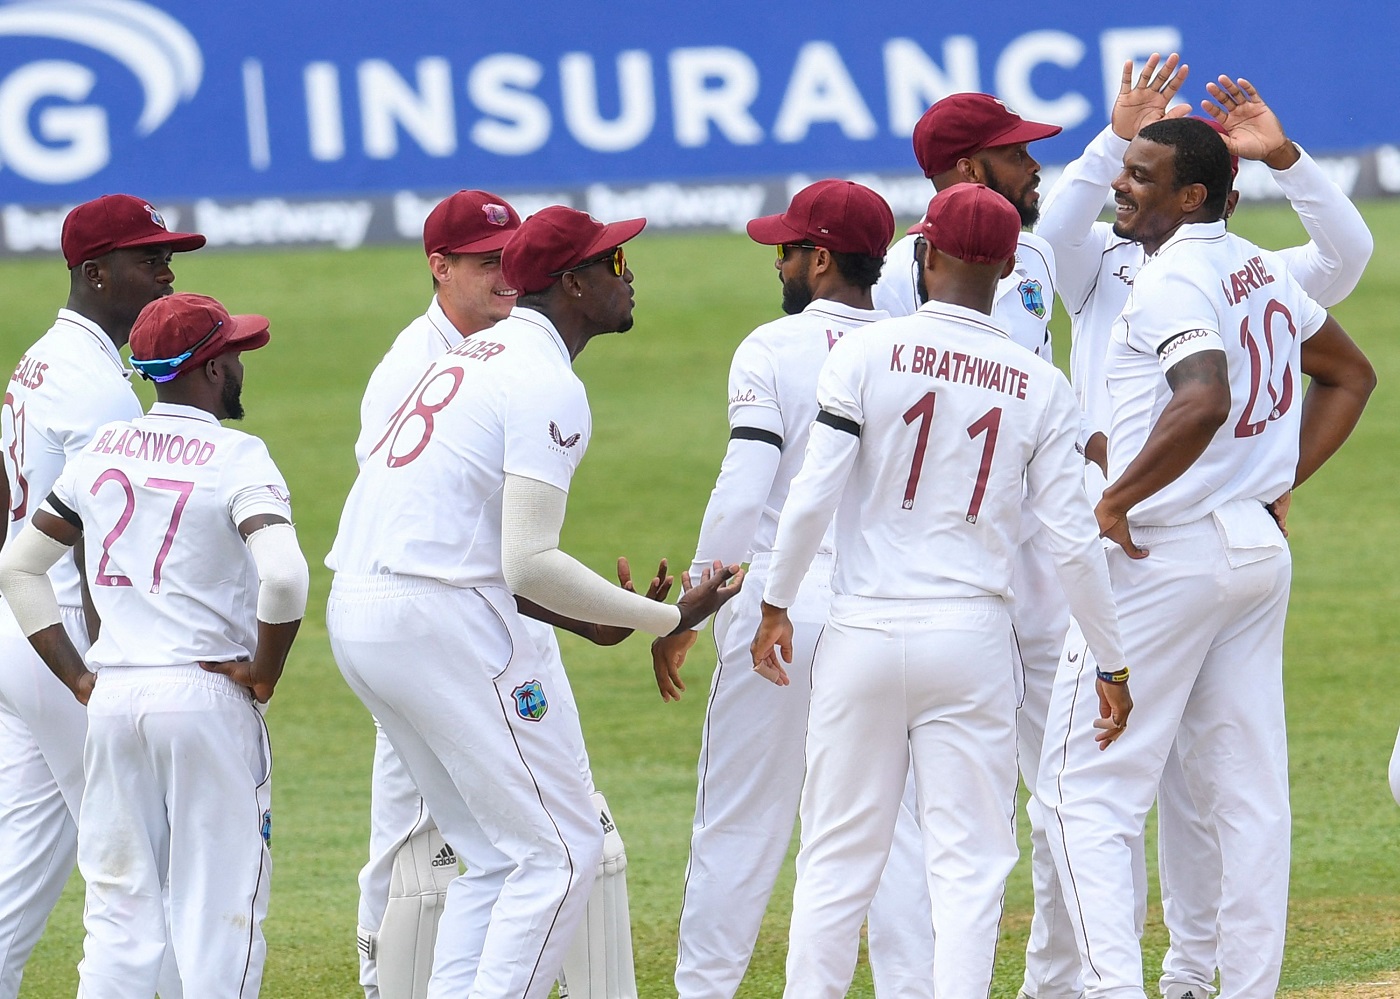 West Indies vs Pakistan 2021: 1st Test – Dream11 Team Prediction, Fantasy Cricket Tips & Playing XI Details